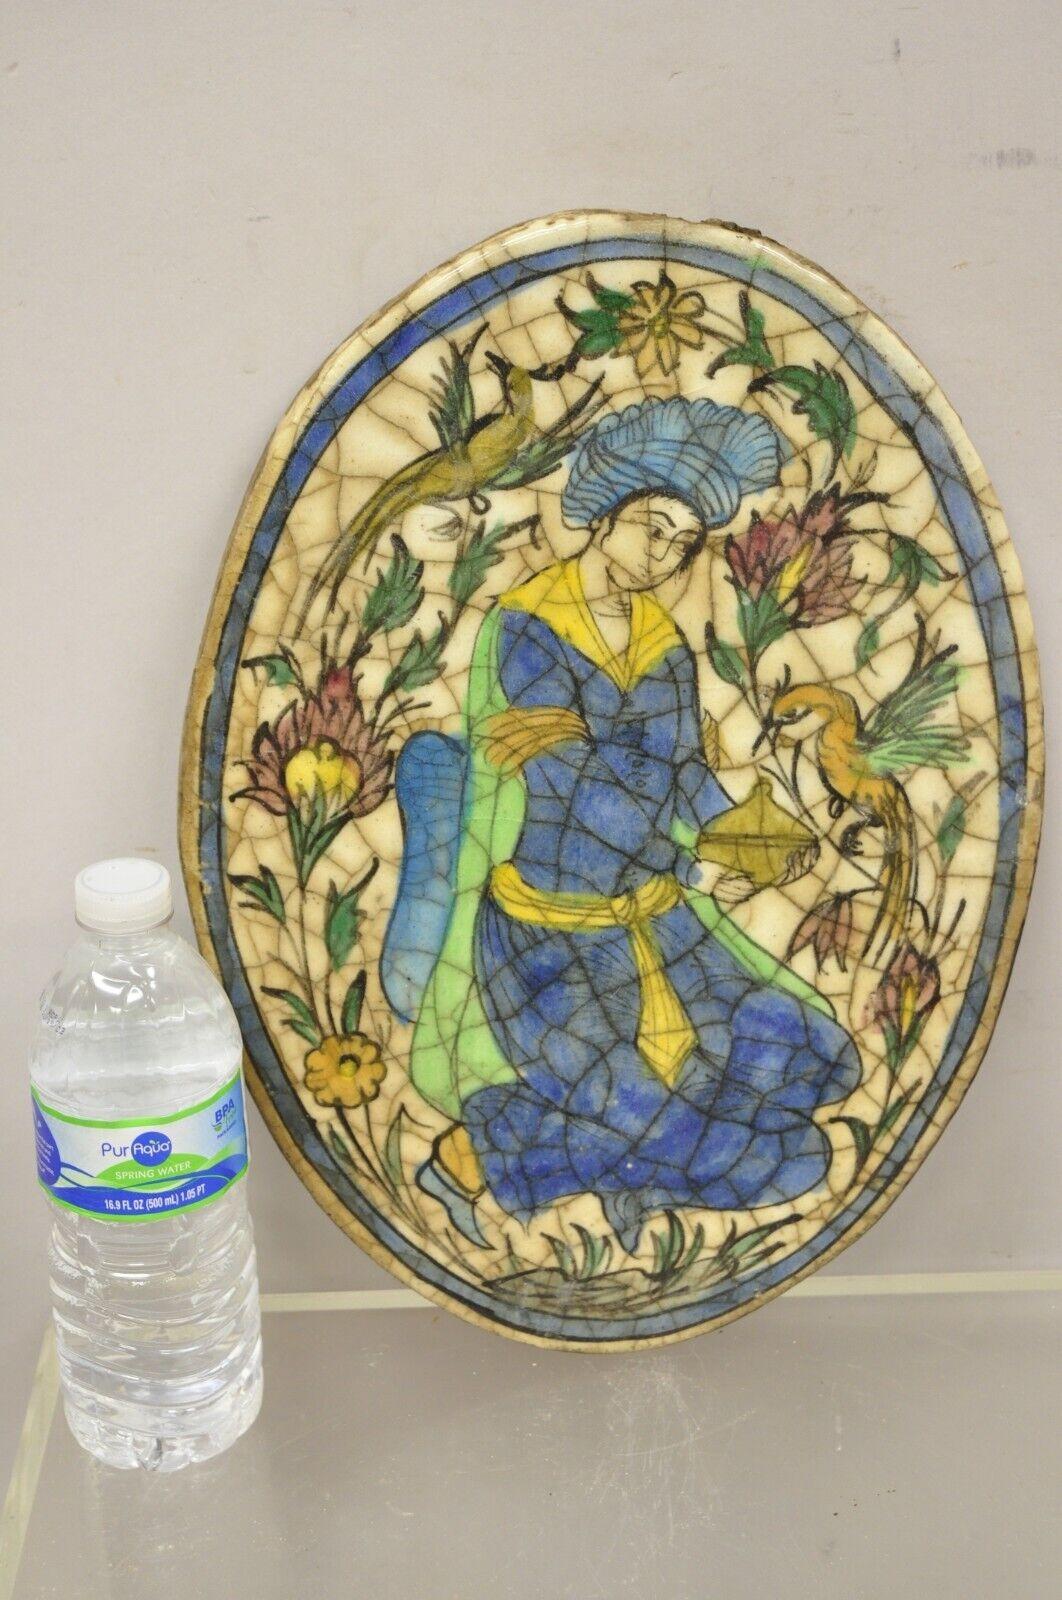 Antique Persian Iznik Qajar Style Ceramic Pottery Oval Tile Figure in Blue Garb with Bird C3. Item features original crackle glazed finish, heavy ceramic pottery construction, very impressive detail, wonderful style and form. Great to mount as wall